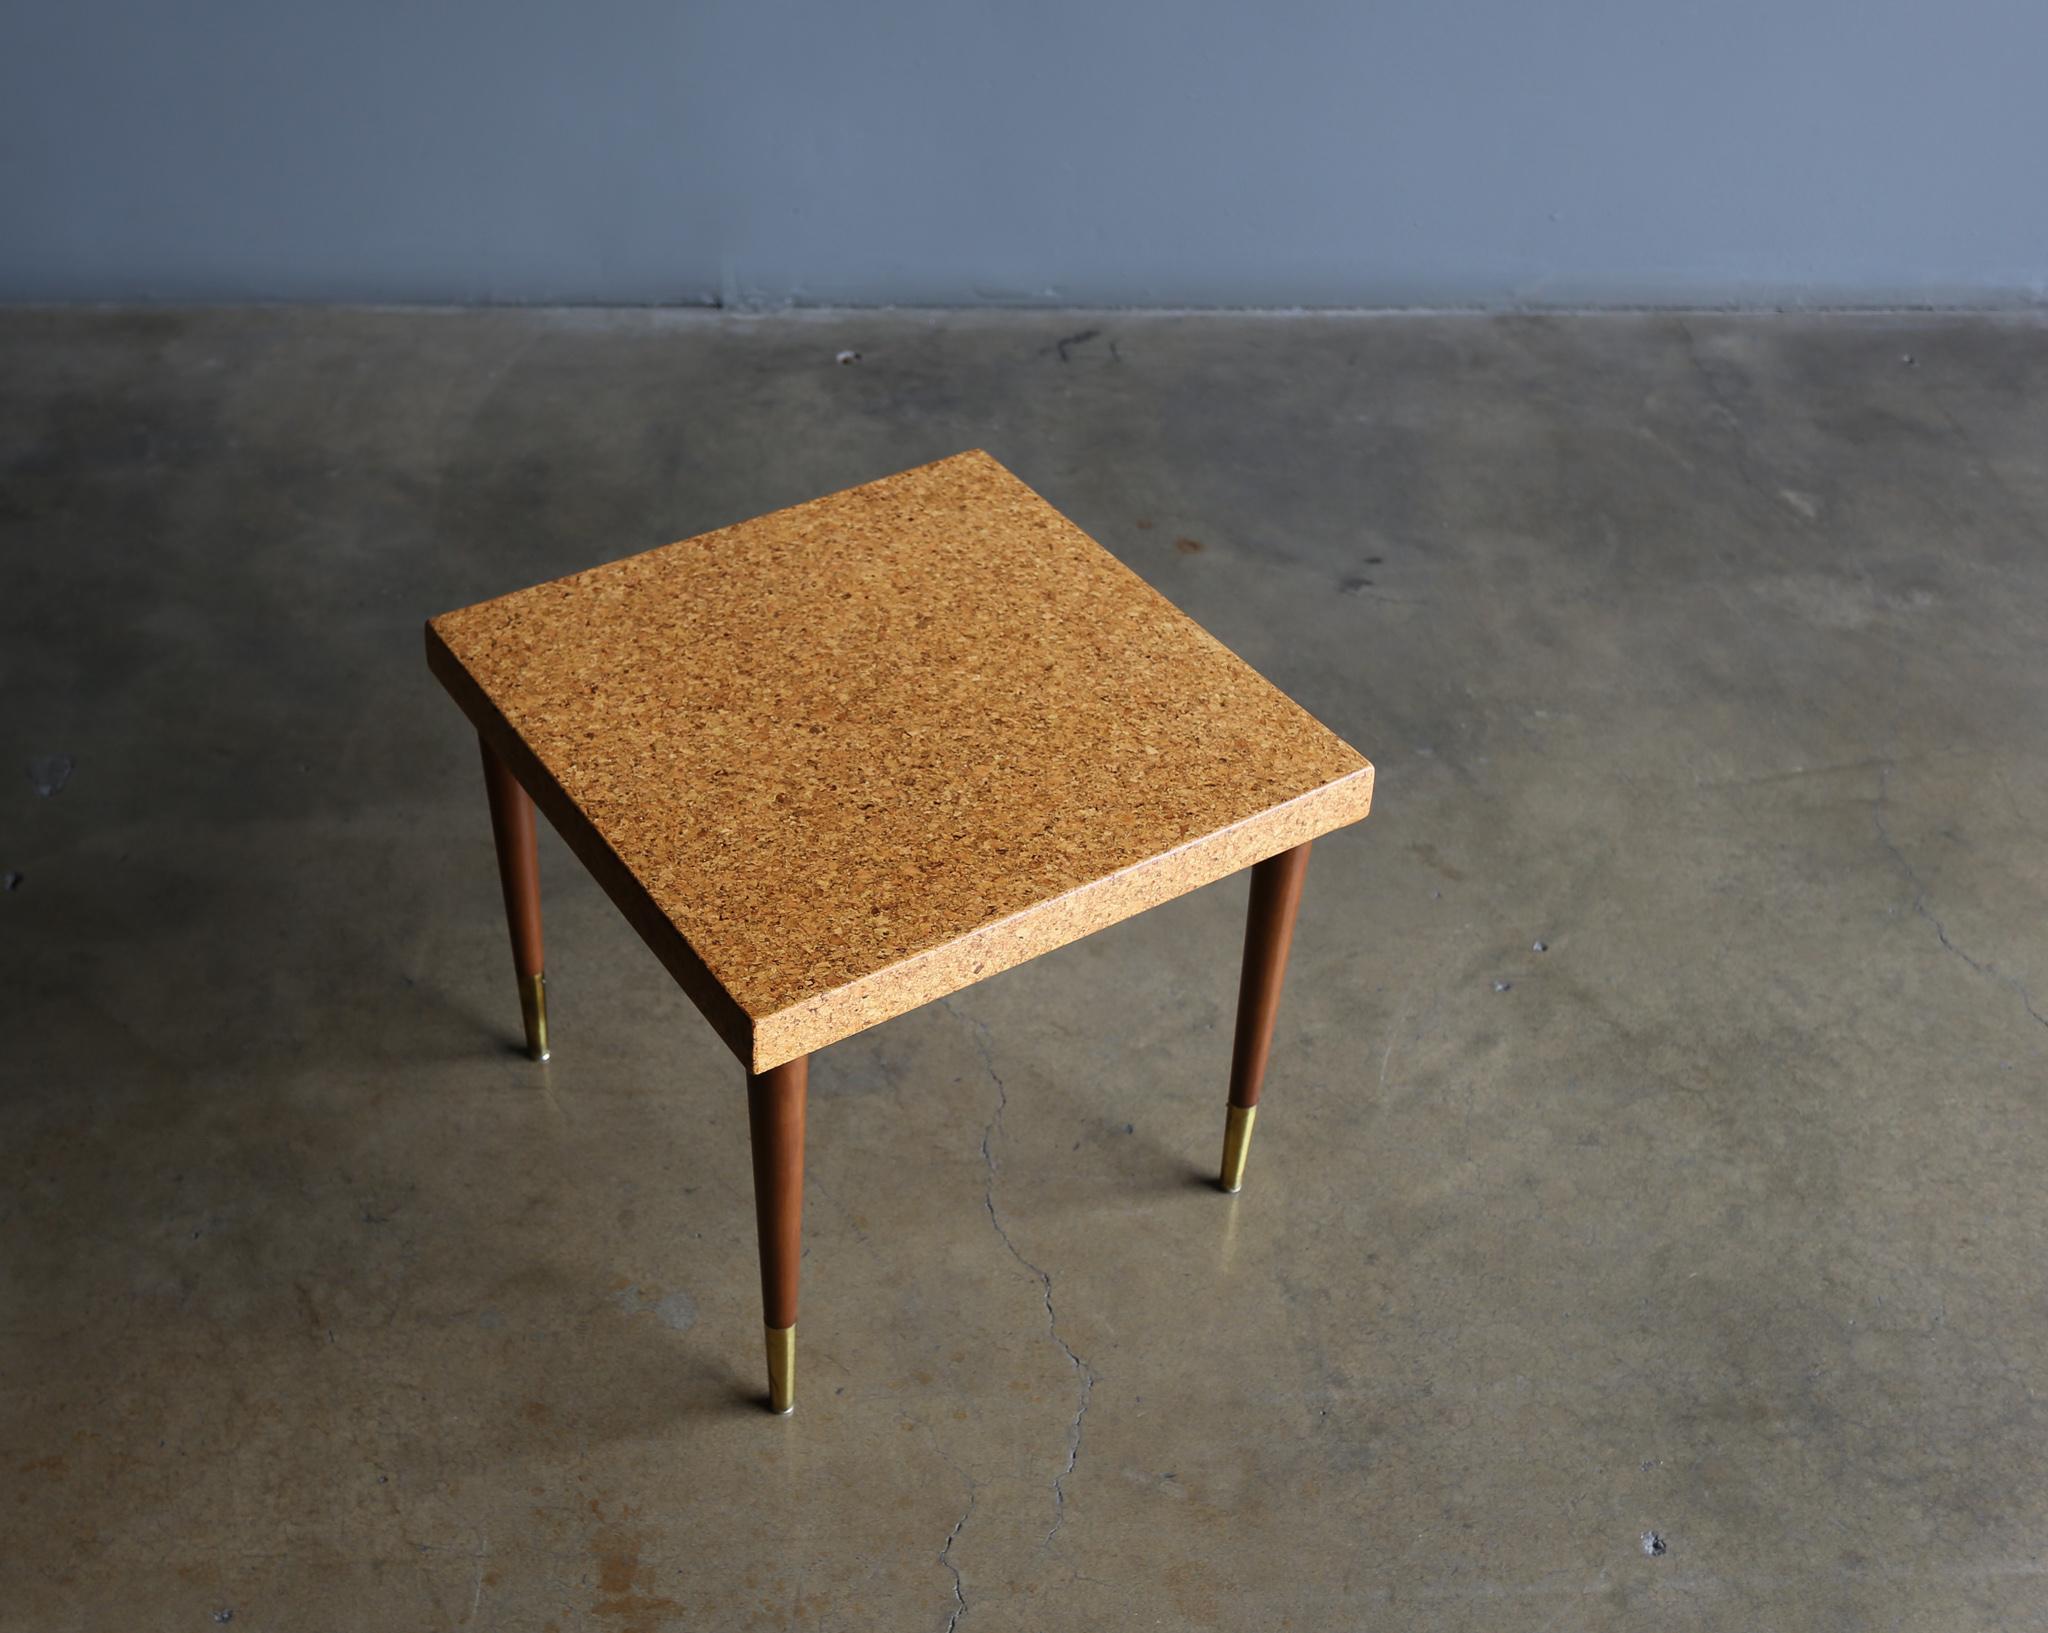 20th Century Paul Frankl Cork Side Tables for Johnson Furniture Company, circa 1950